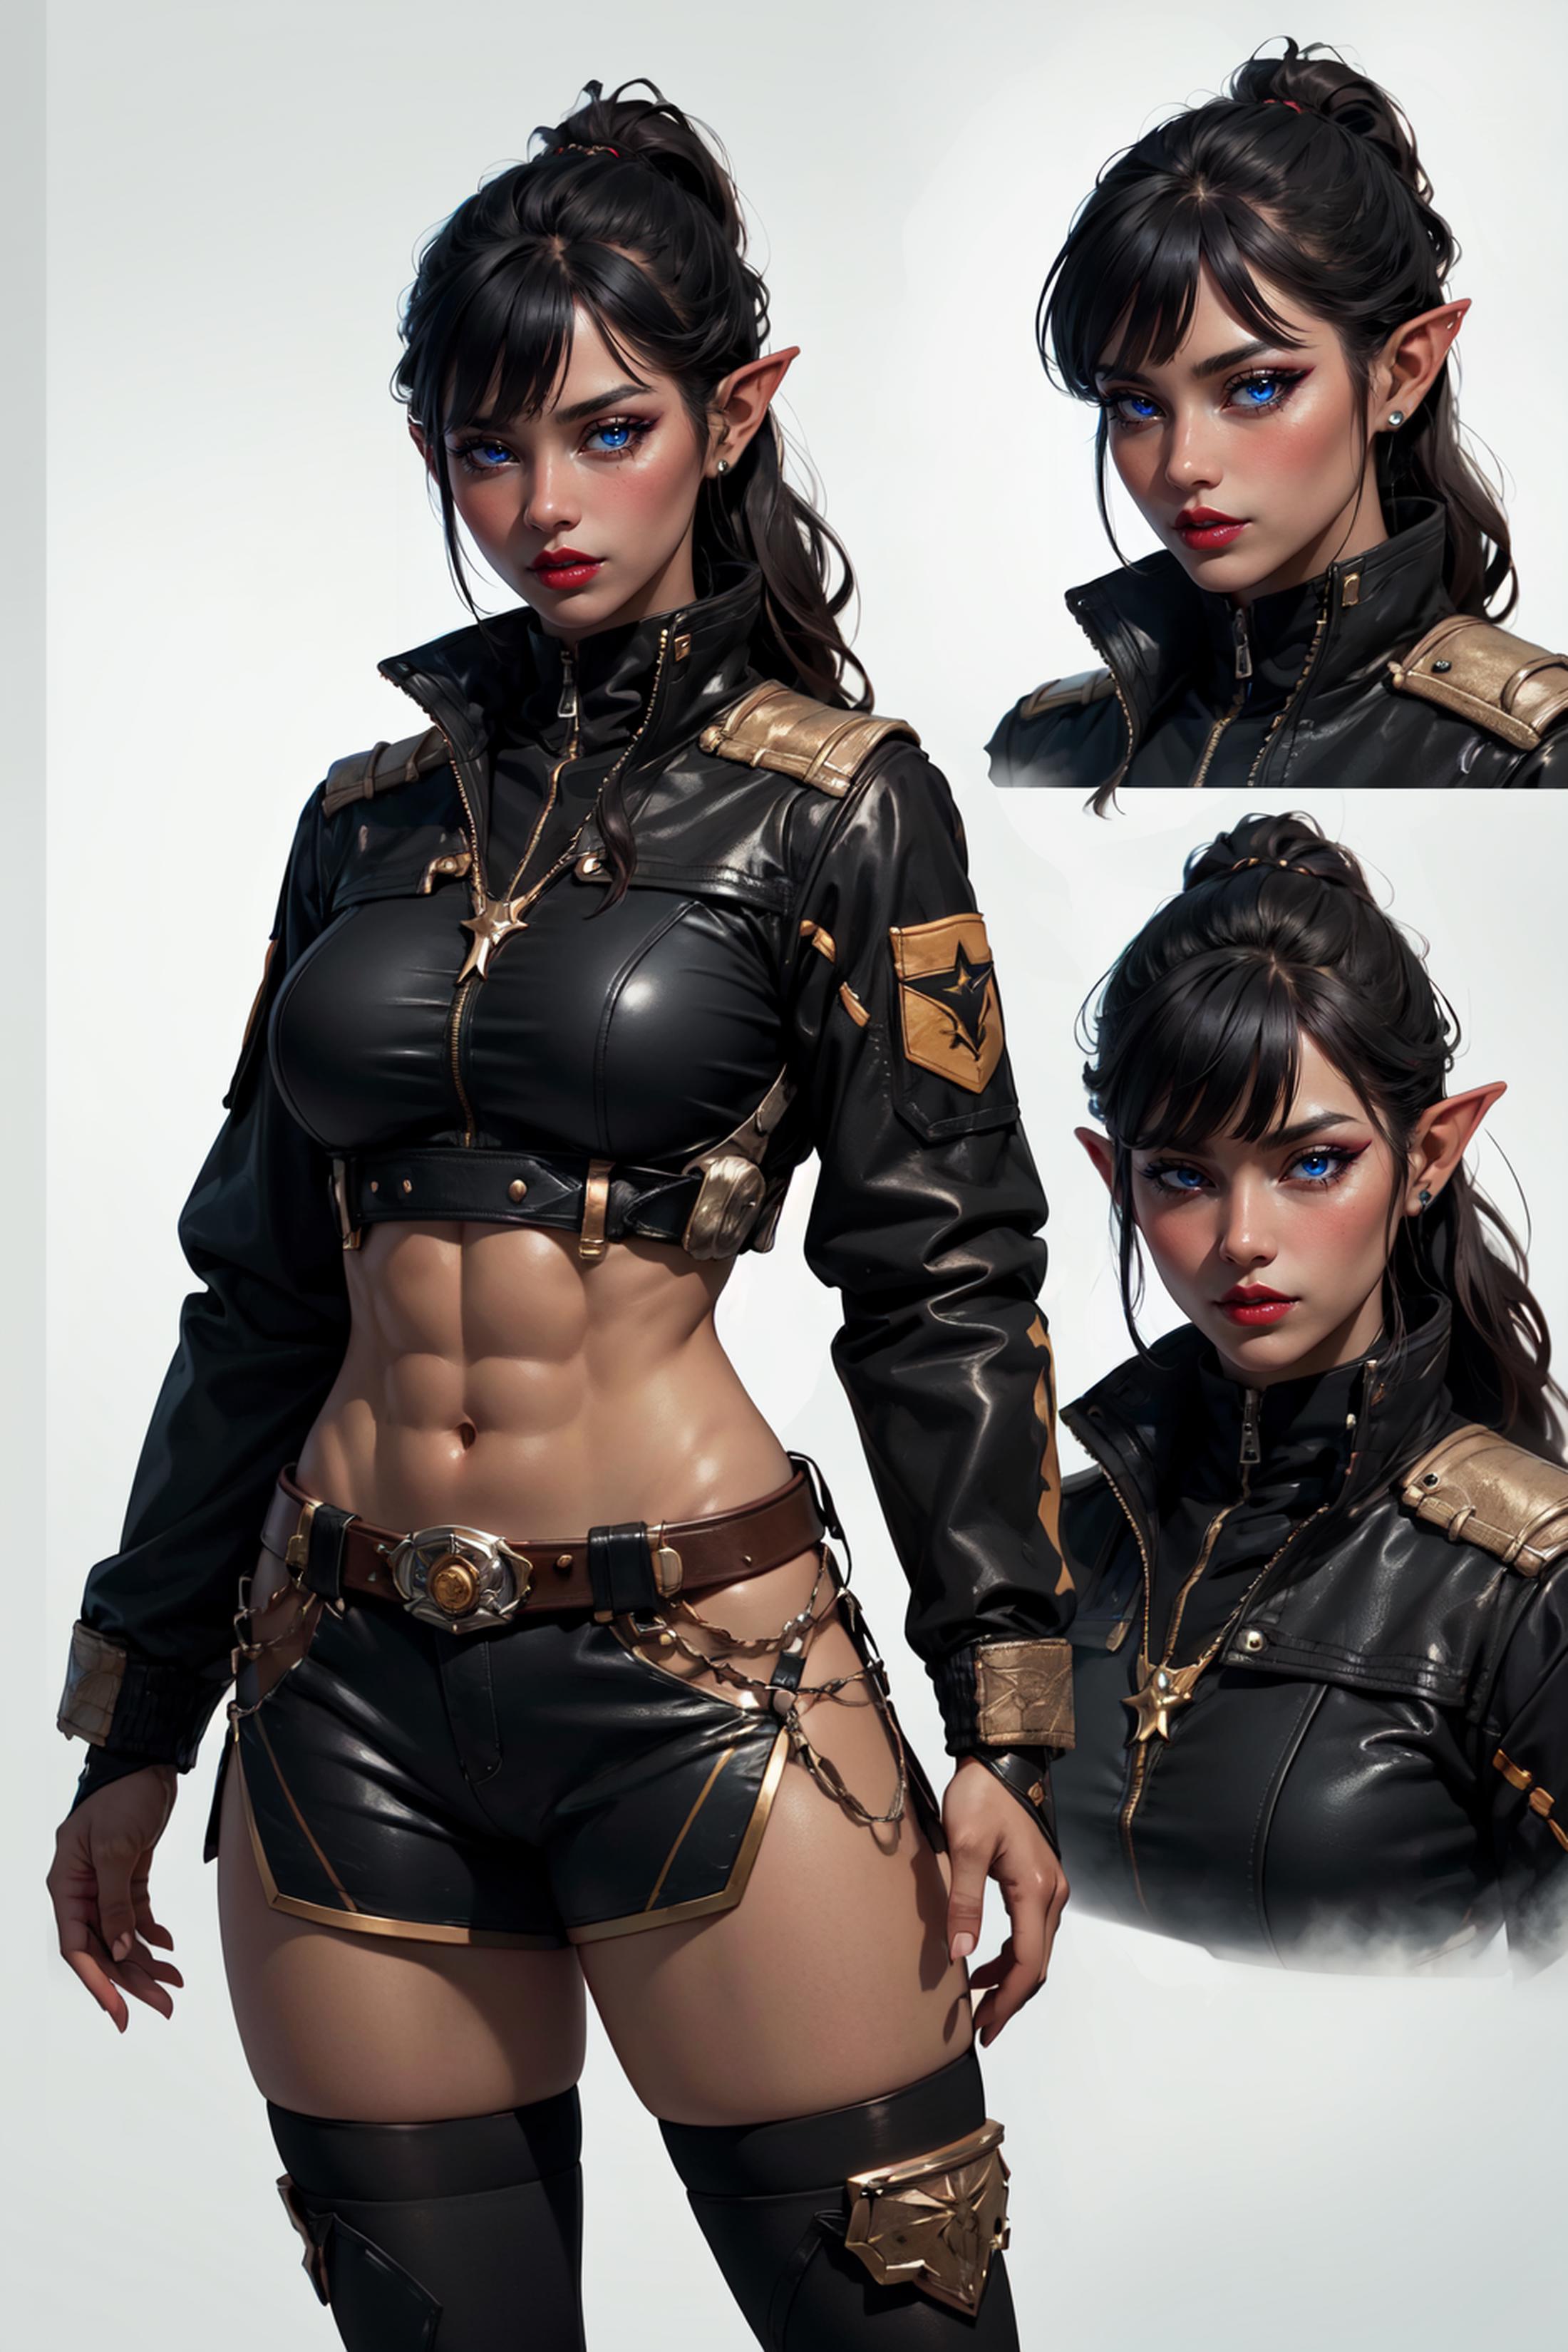 A 3D render of an elf woman with blue eyes, wearing a black jacket and short shorts, standing with her hands on her hips.